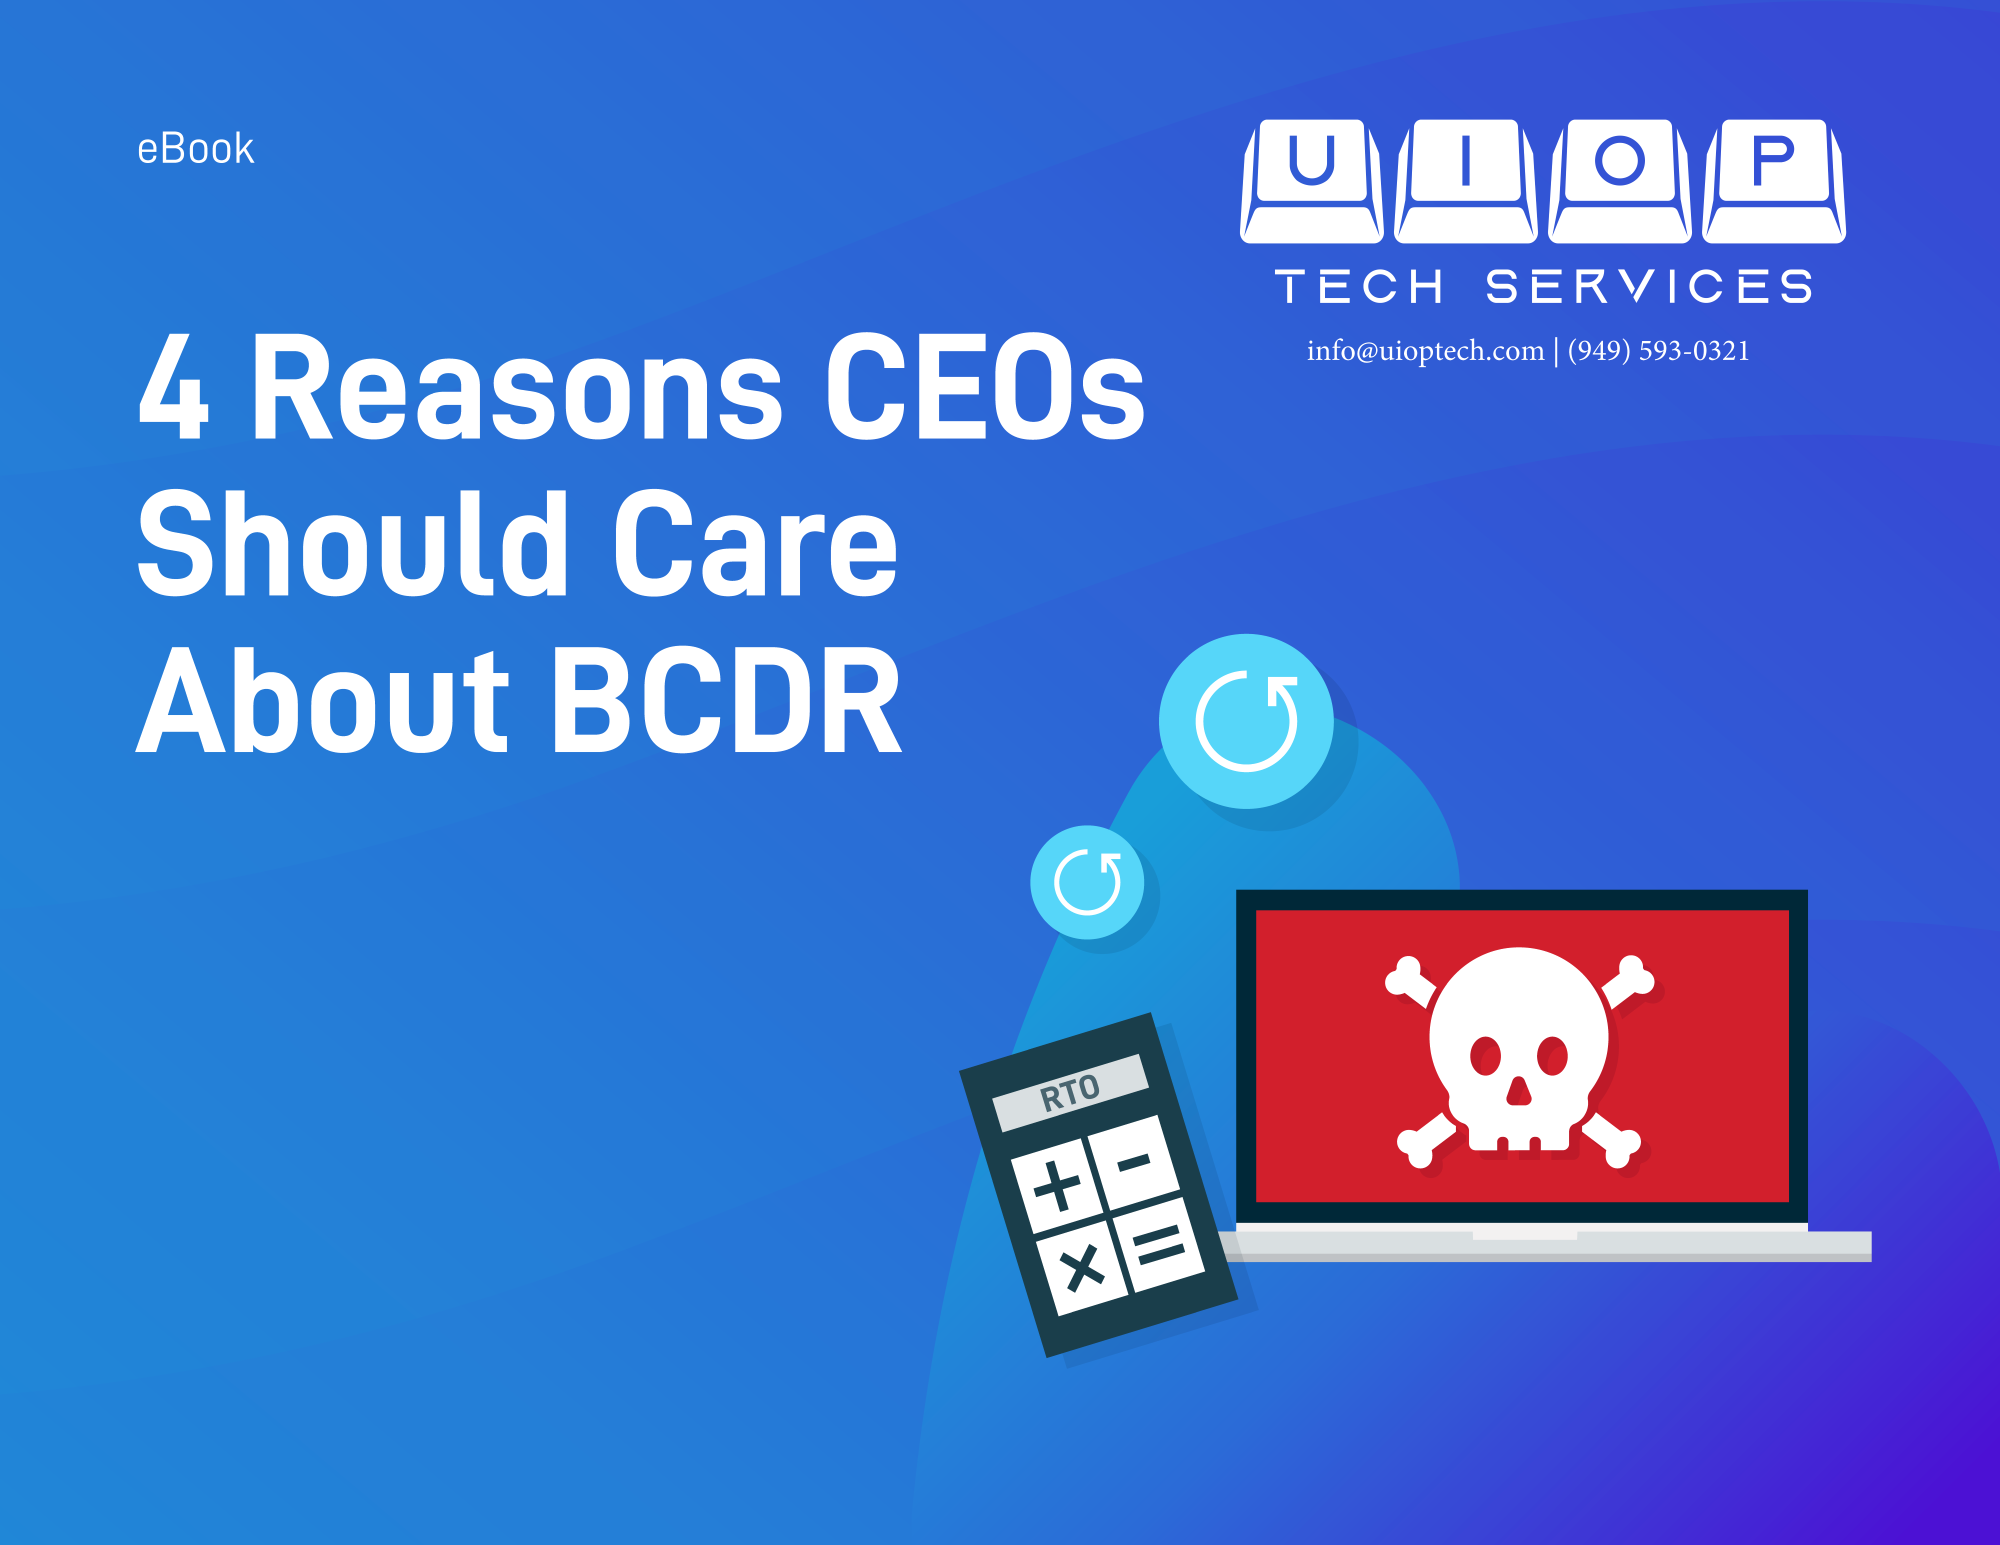 eBook: 4 Reasons CEOs Should Care About BCDR